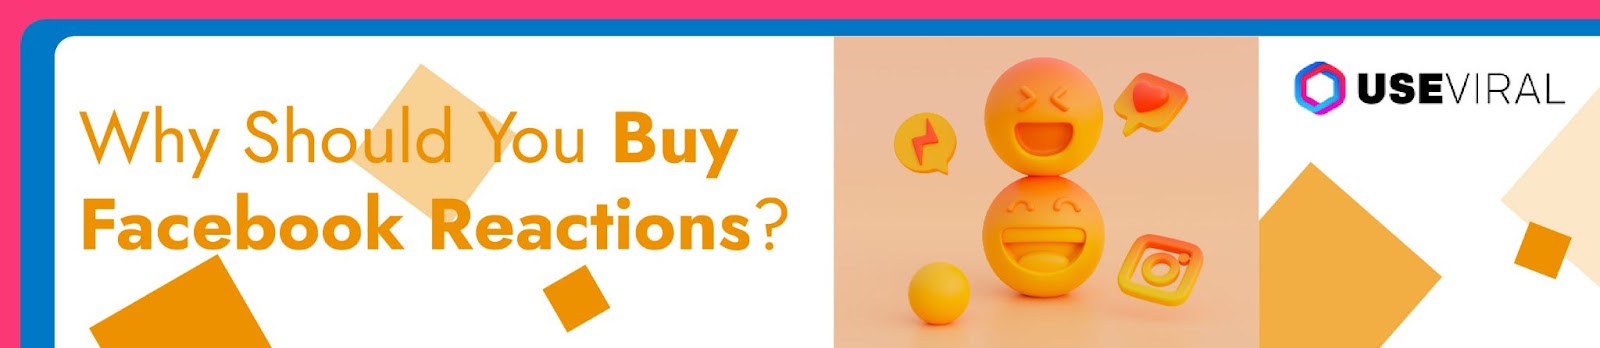 Why Should You Buy Facebook Reactions?